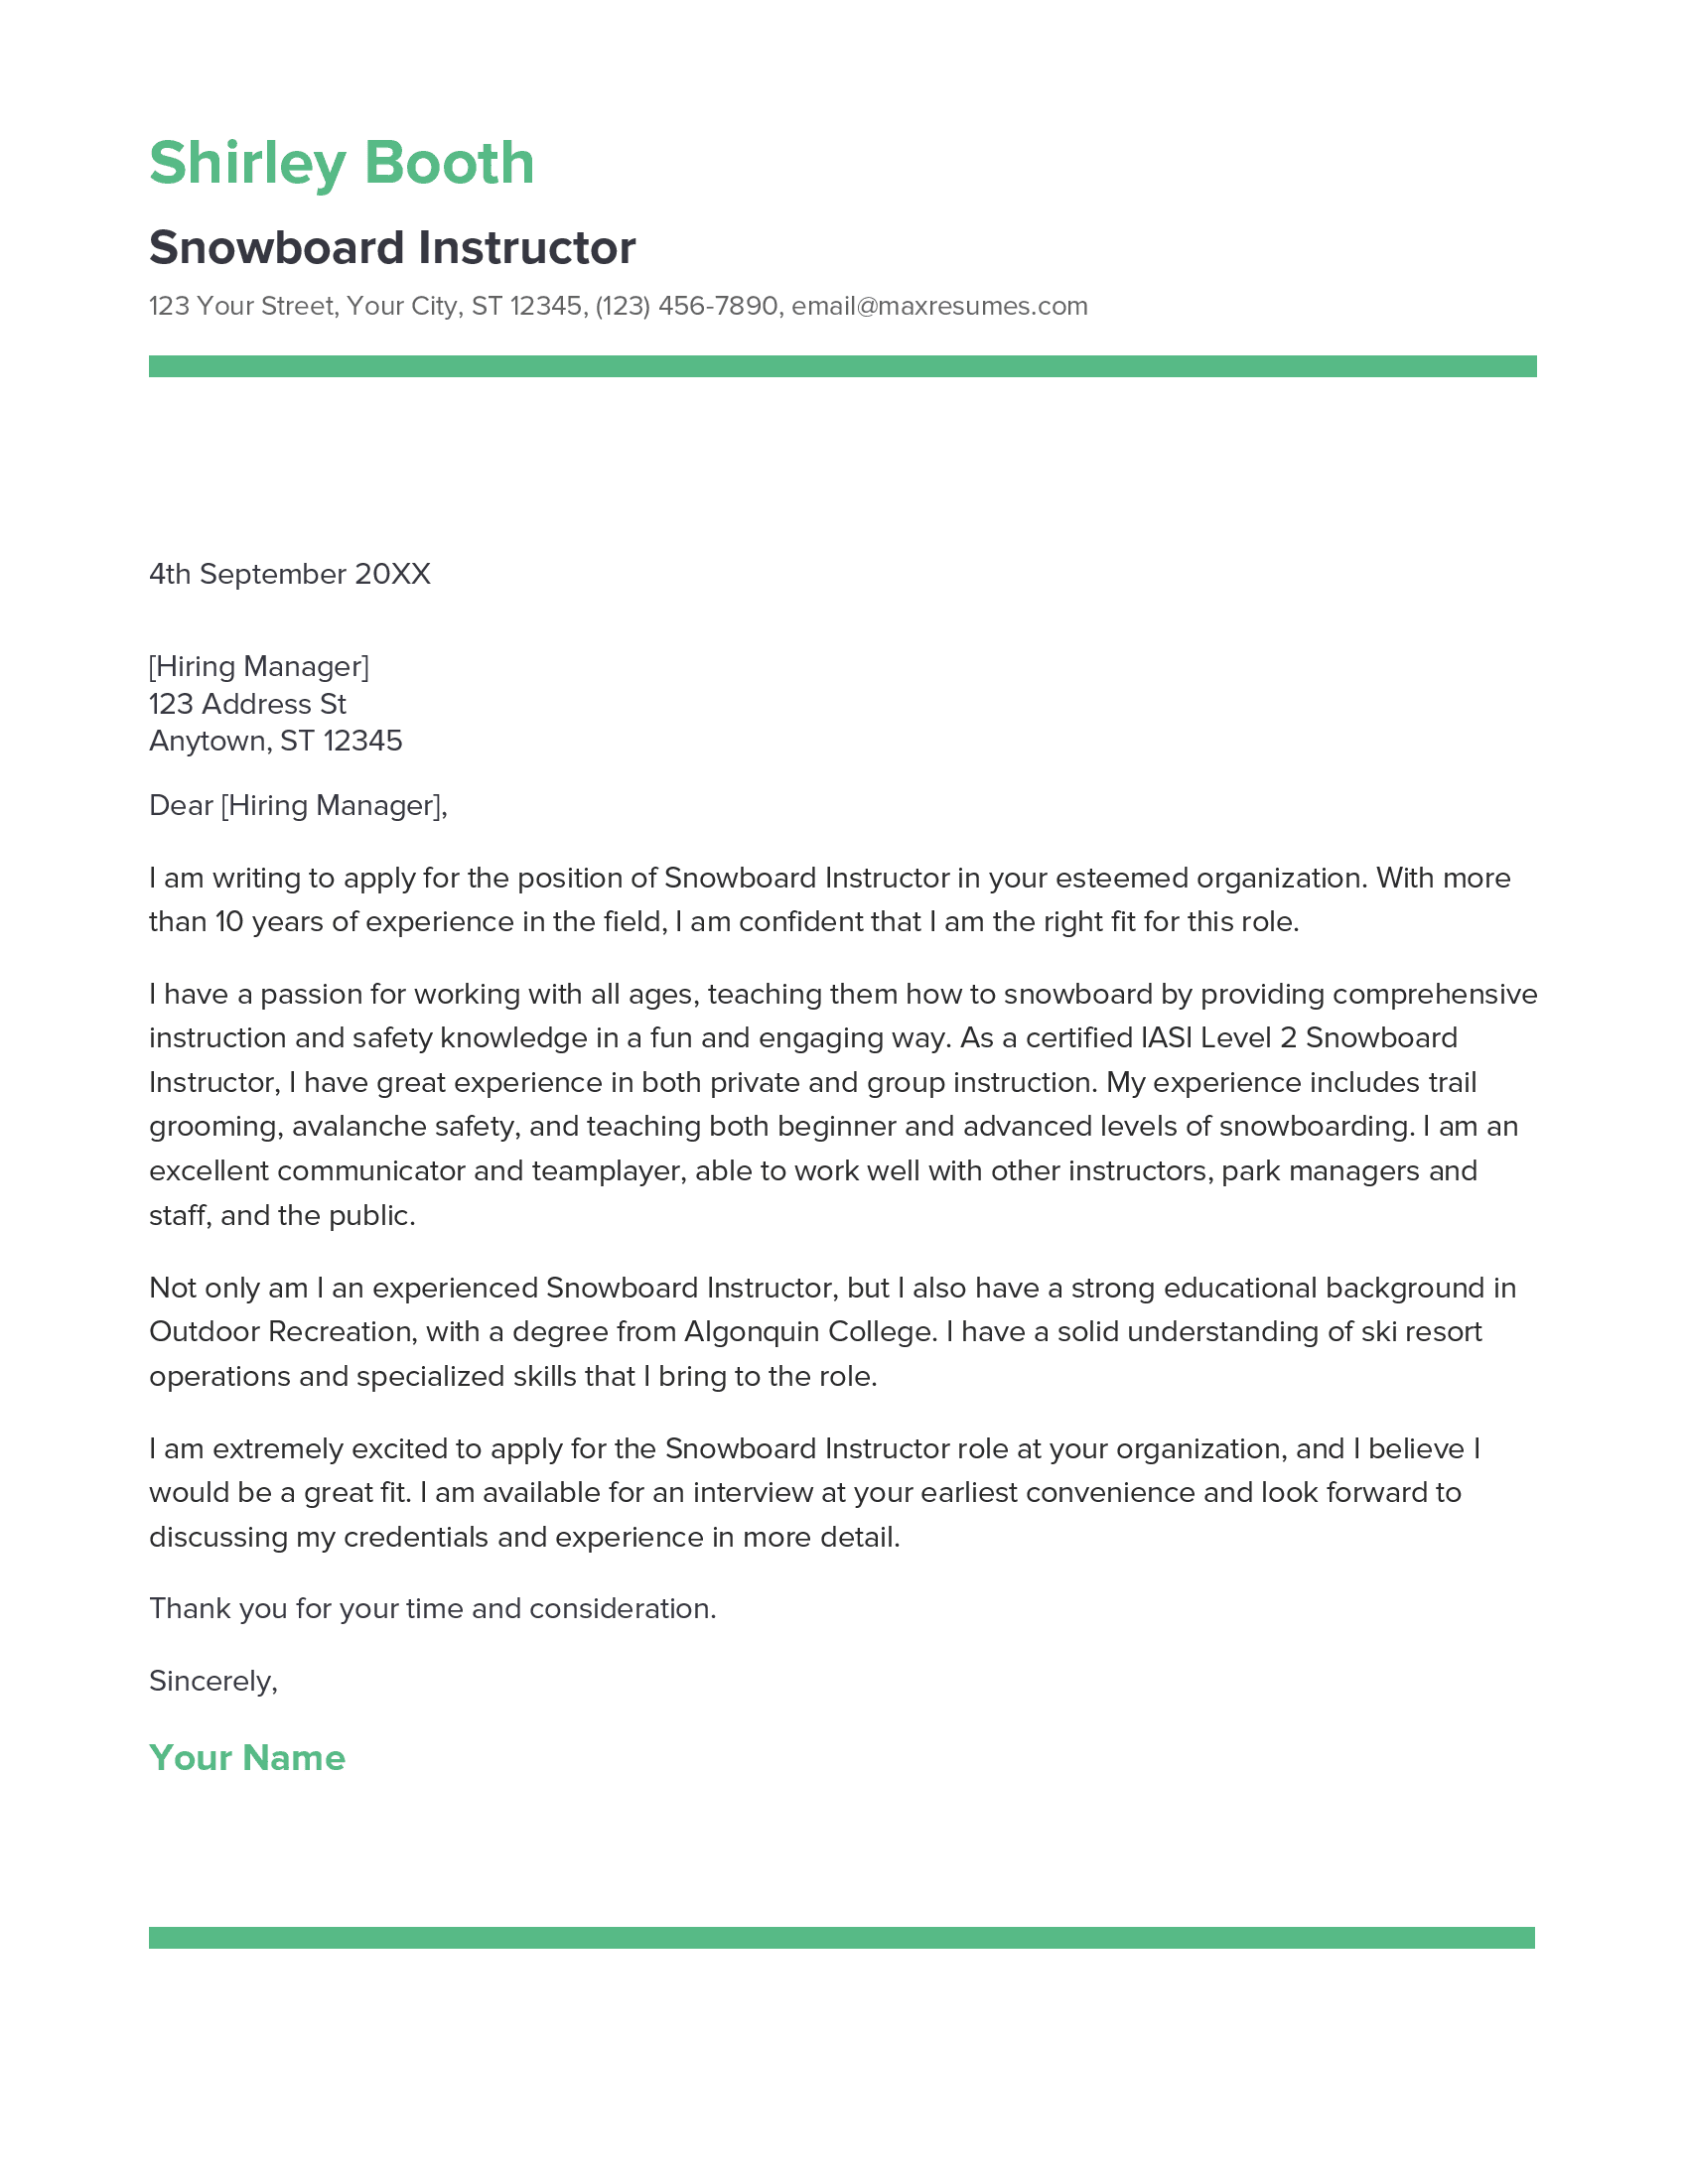 Snowboard Instructor Cover Letter Example